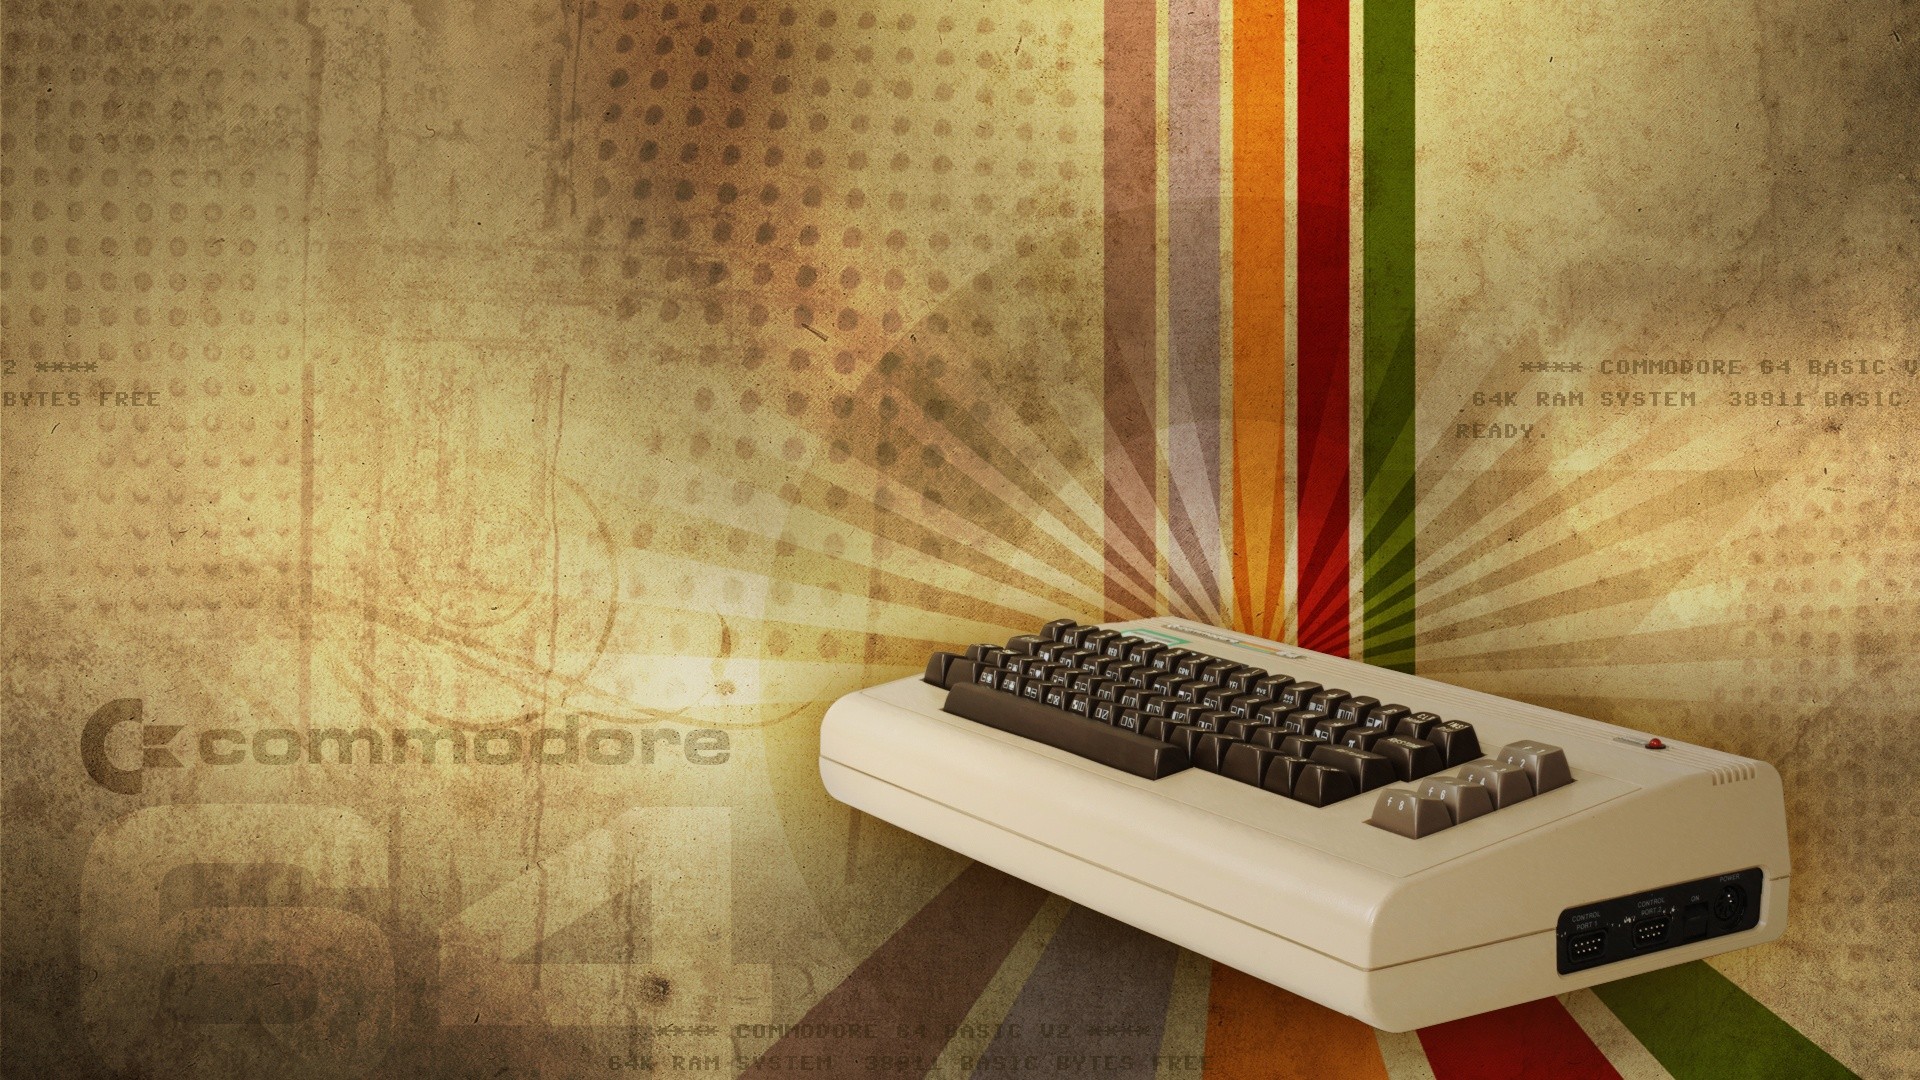 Retro Games Commodore 64 Keyboards Vintage Consoles Computer 1920x1080